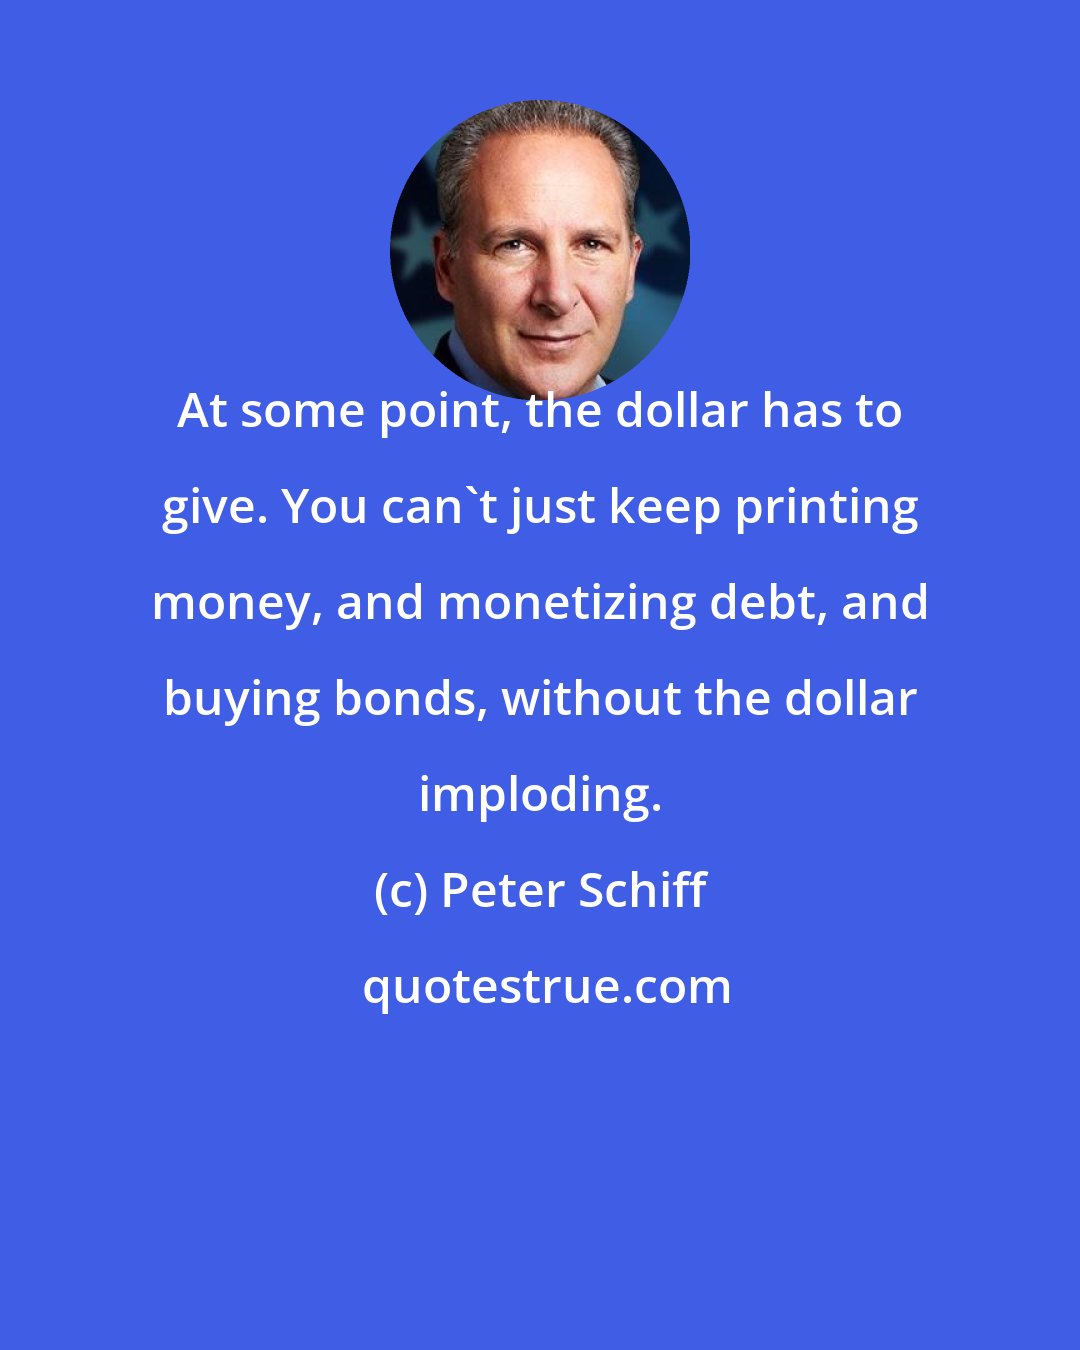 Peter Schiff: At some point, the dollar has to give. You can't just keep printing money, and monetizing debt, and buying bonds, without the dollar imploding.